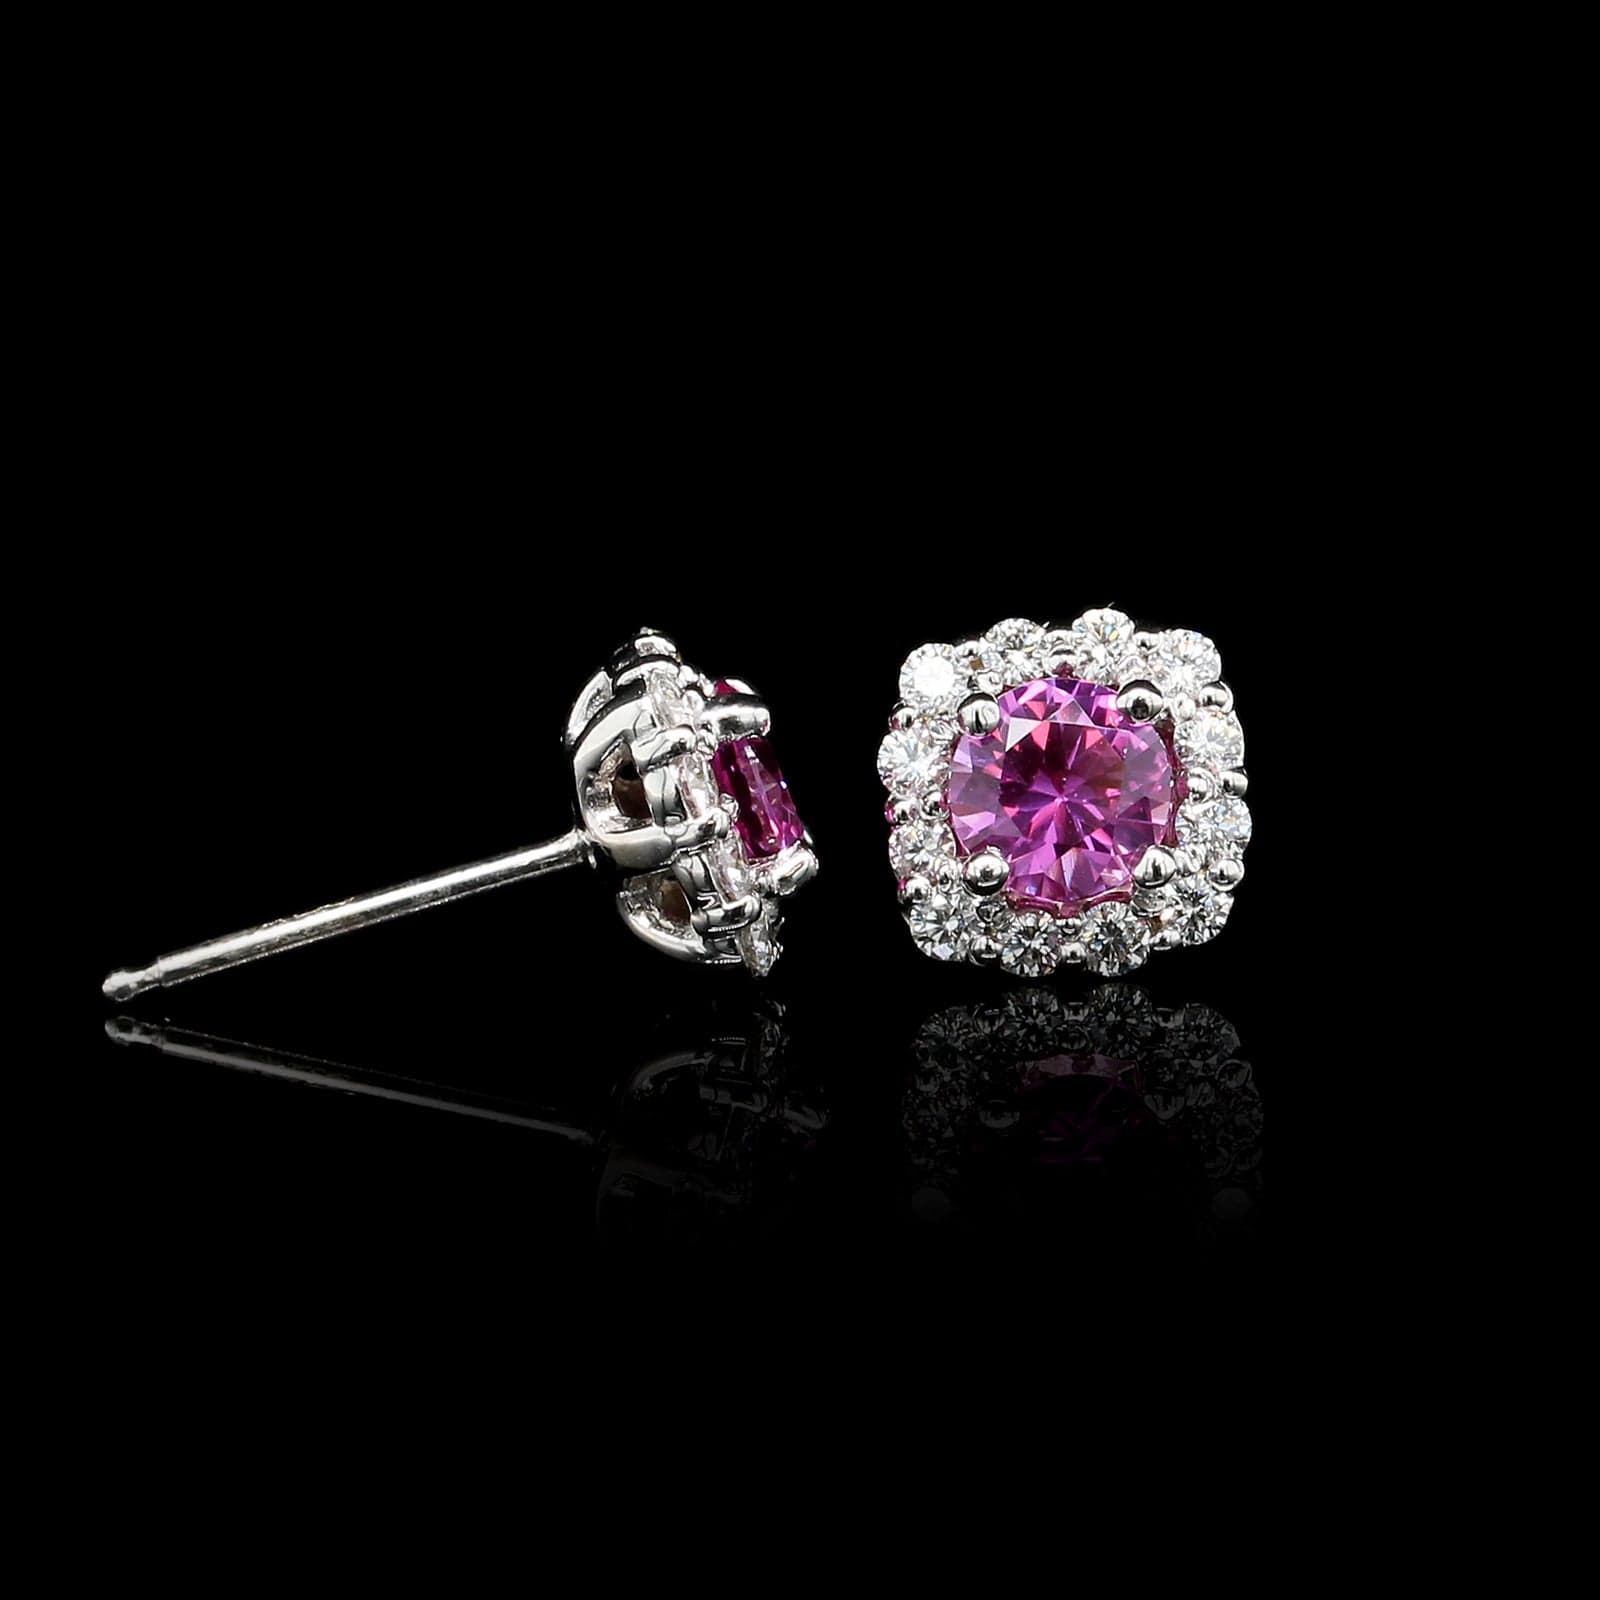 14K White Gold Estate Pink Sapphire and Diamond Earrings